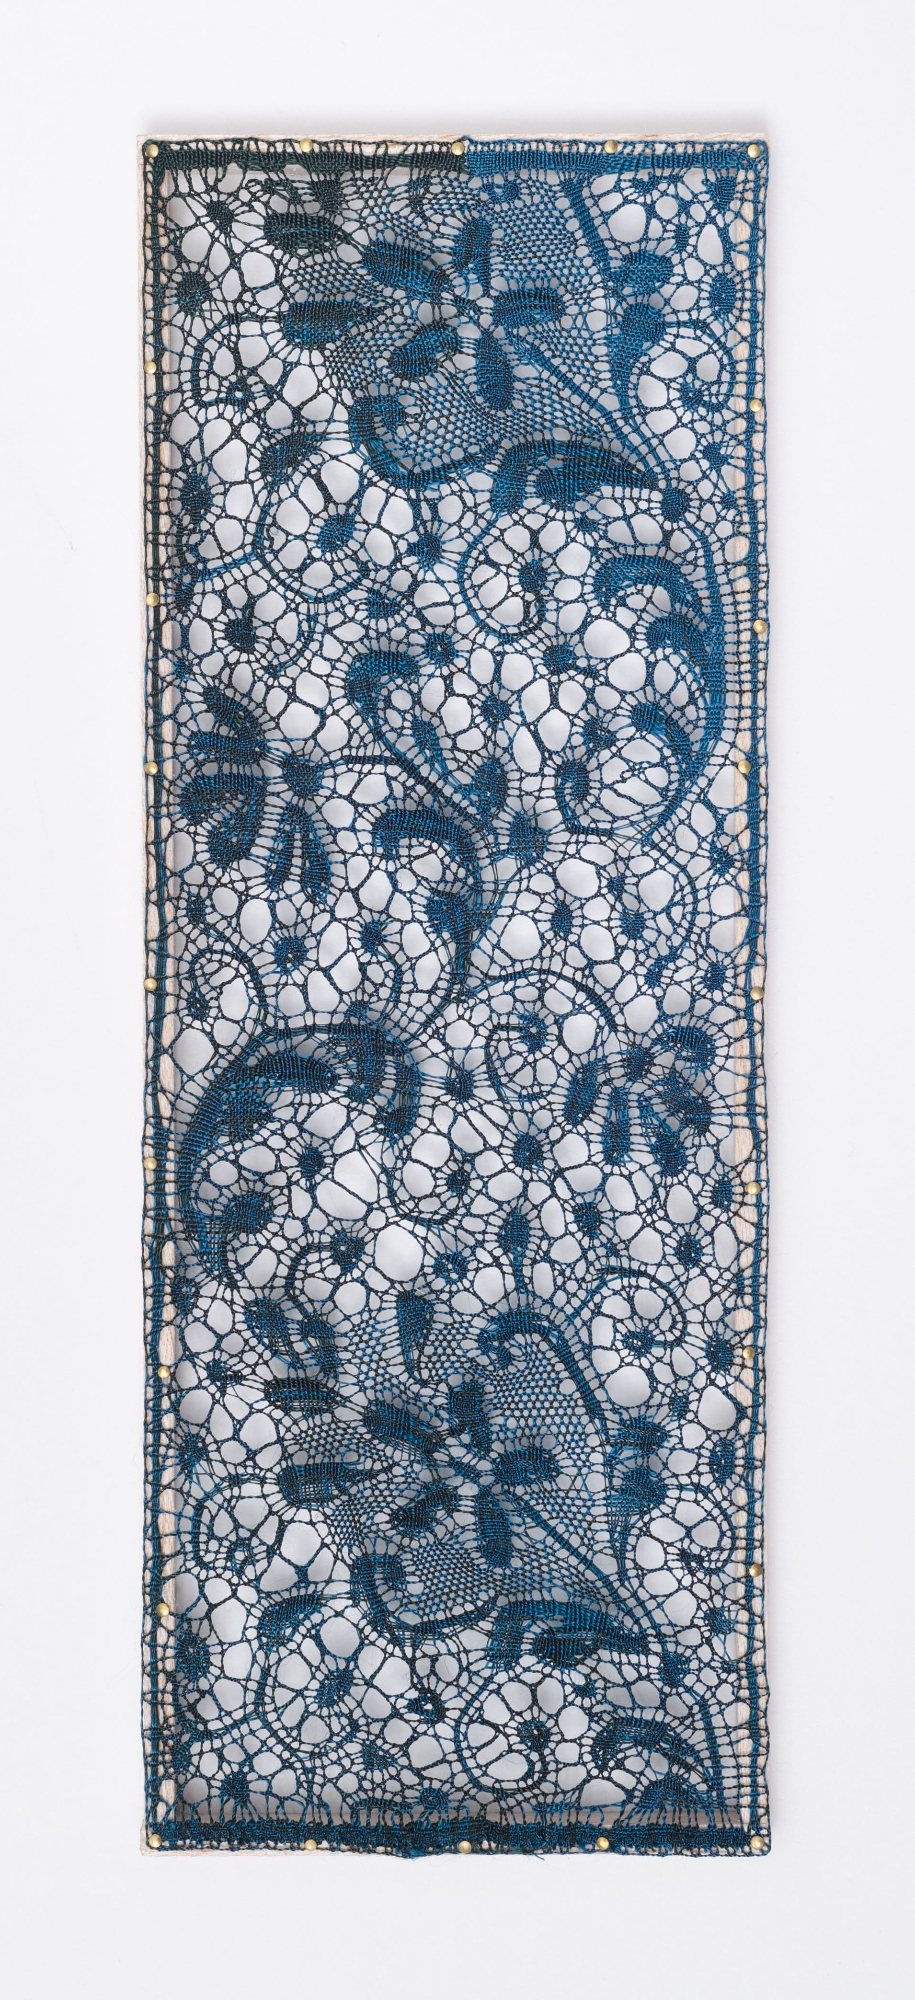 Pierre Fouché. Onskeibare Bemindes. 2016. Bobbin lace in silk, wood laminate 24.5 x 30 cm. [Based on a traditional 18th Century design as reconstructed by Ulrike Voelker]